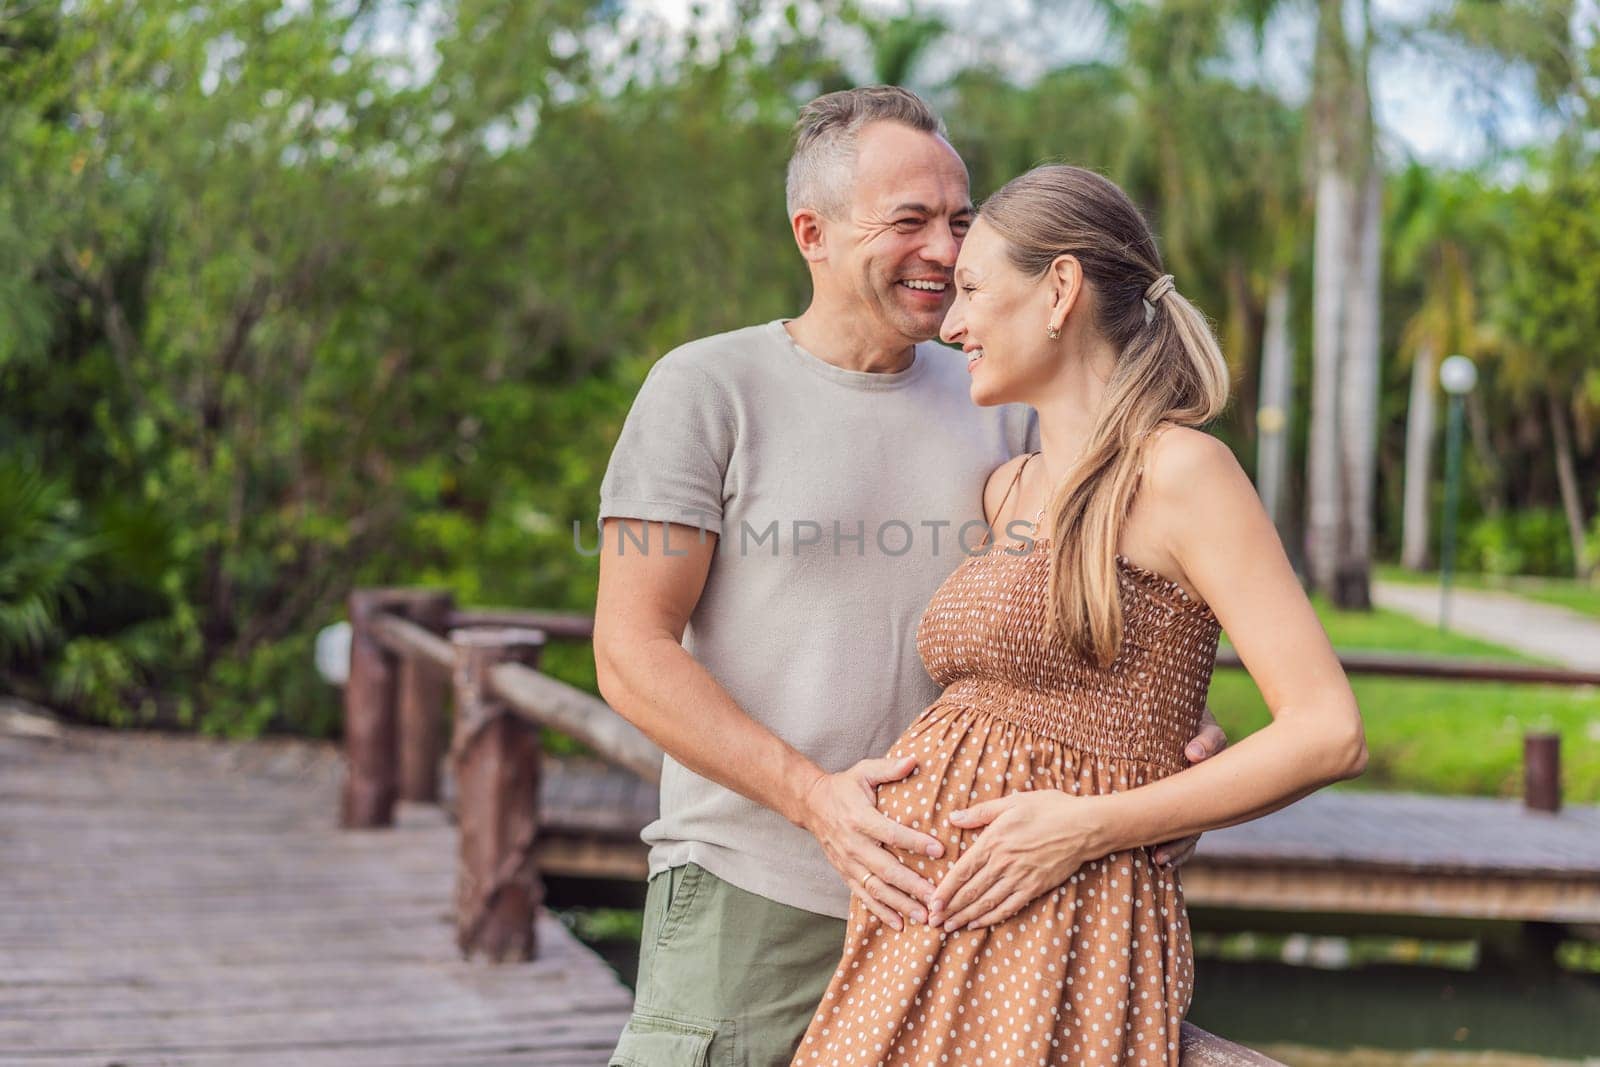 A happy, mature couple over 40, enjoying a leisurely walk in a park, their joy evident as they embrace the journey of pregnancy later in life.